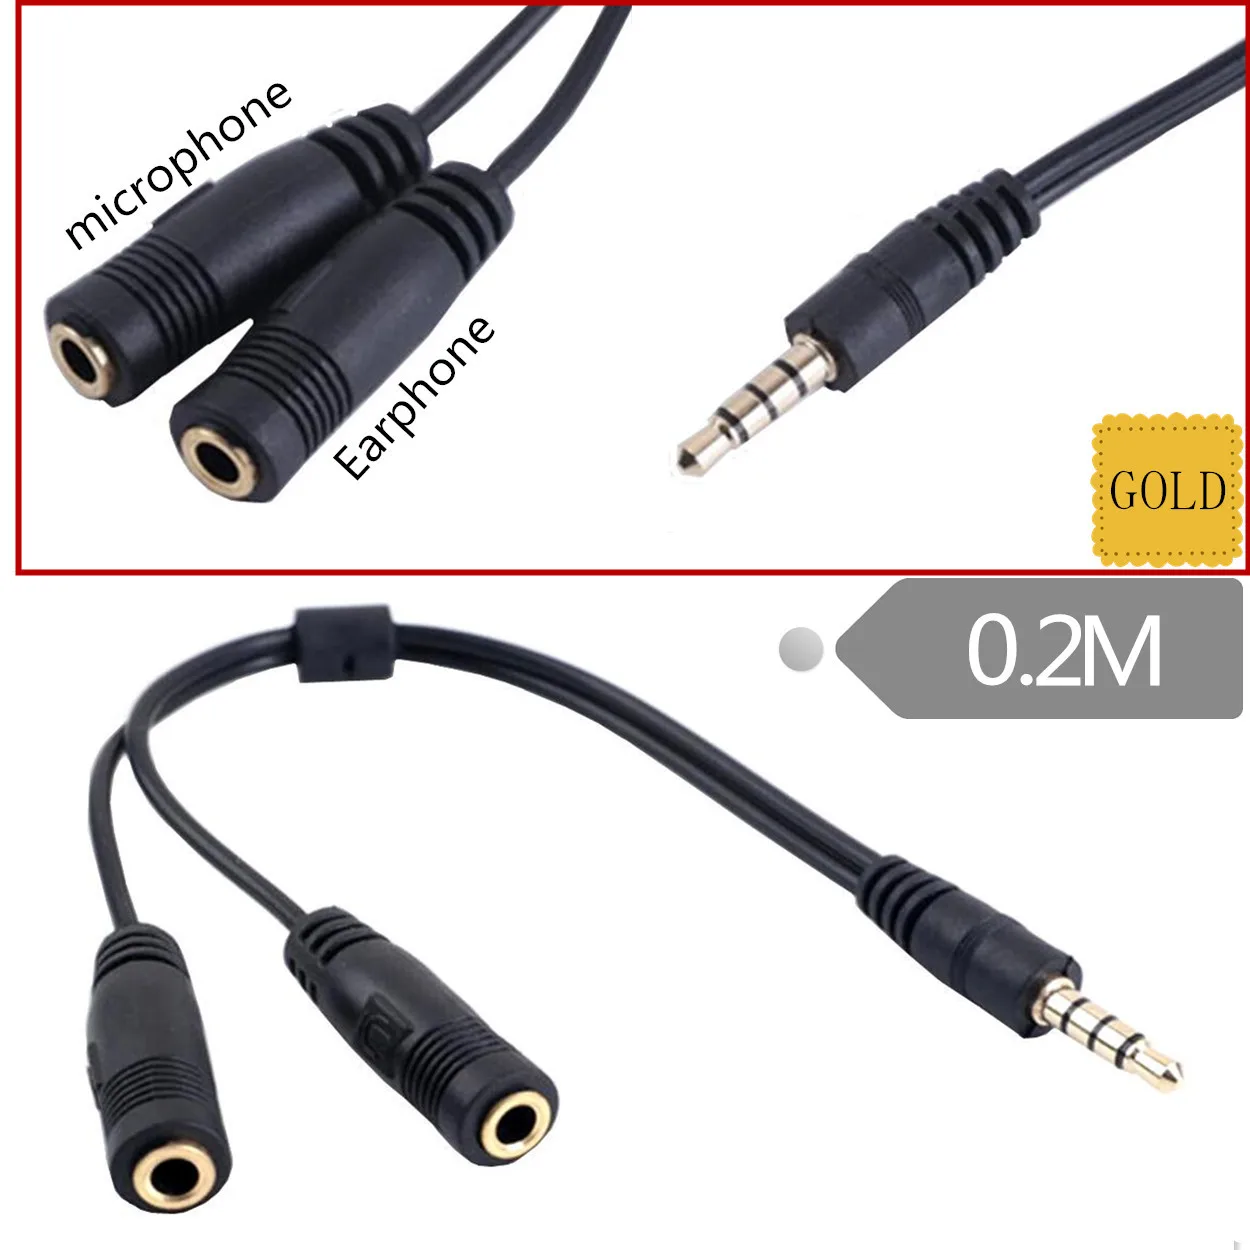 

Laptop Headphone 2 in 1 Y Splitter Cable 3.5mm Stereo TRRS Audio Male To 2 x DC 3.5 Female Earphone Headset+Microphone Adapter